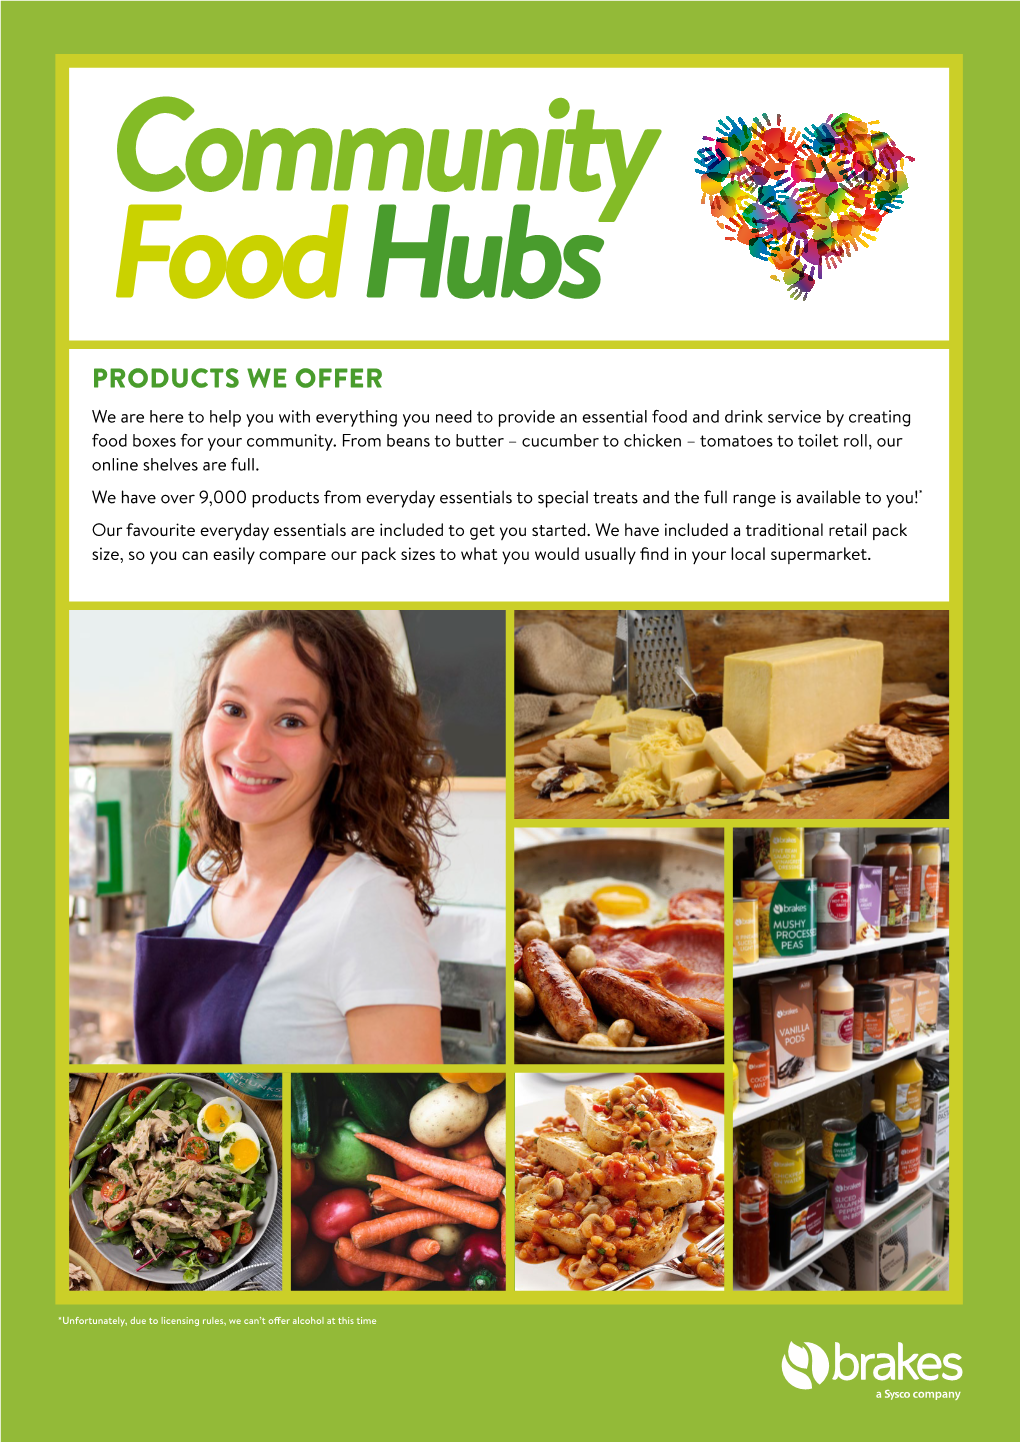 PRODUCTS WE OFFER We Are Here to Help You with Everything You Need to Provide an Essential Food and Drink Service by Creating Food Boxes for Your Community